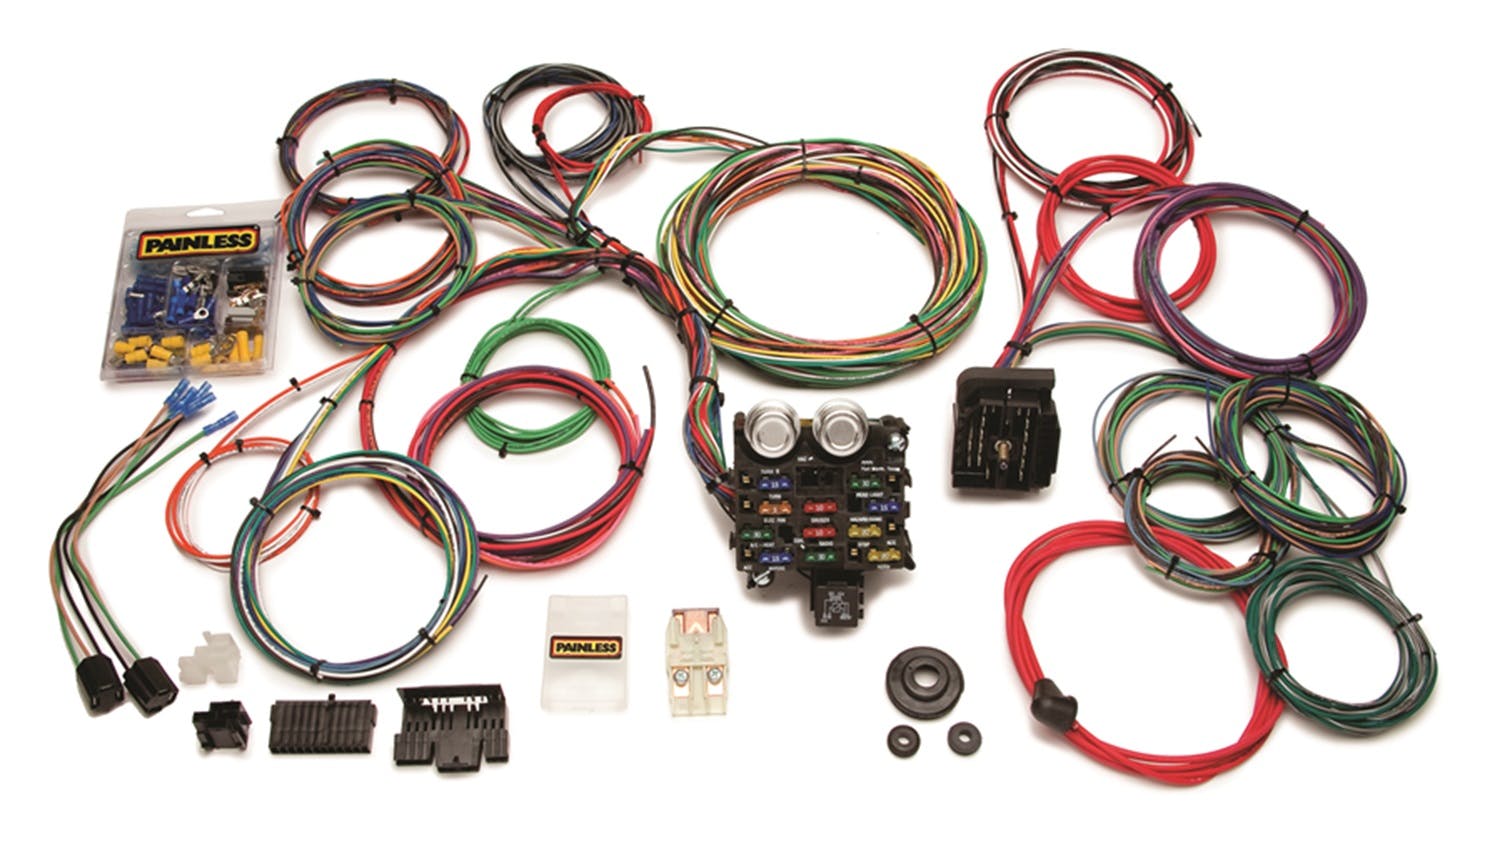 Painless 20103 21 Circuit Wiring Harness